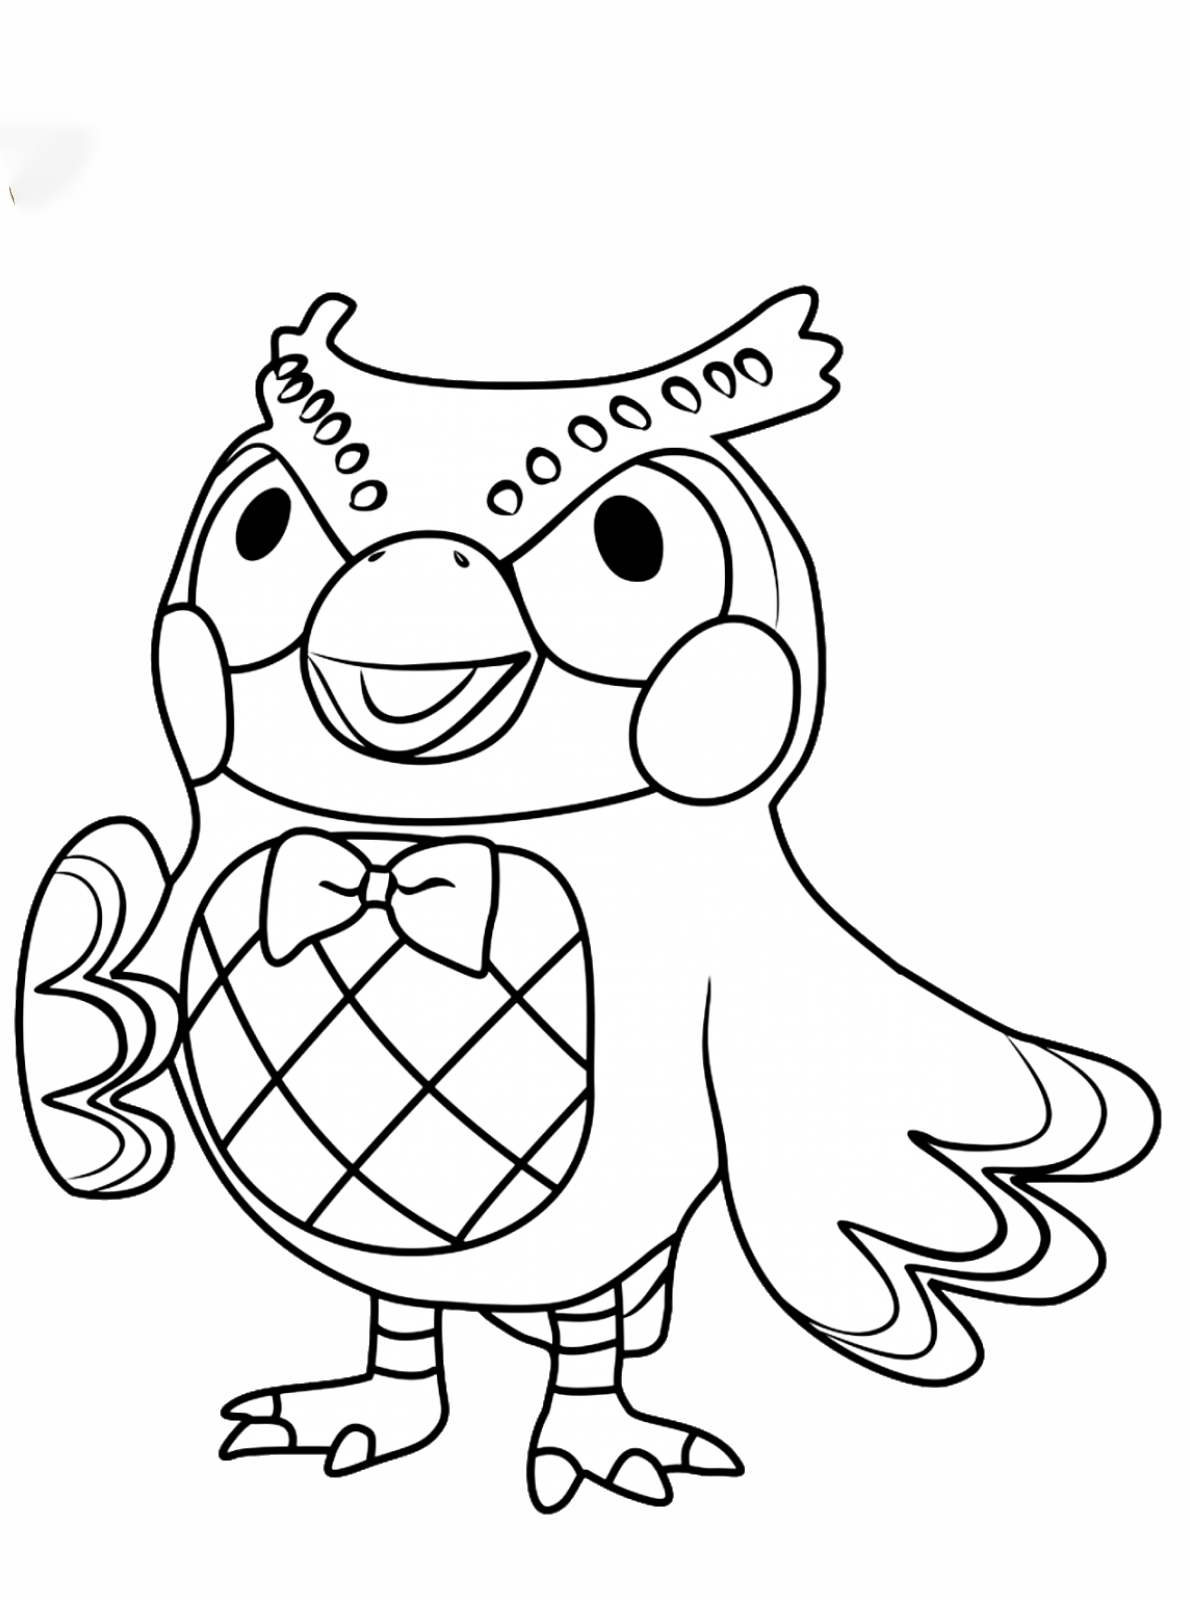 Blather Coloring Pages